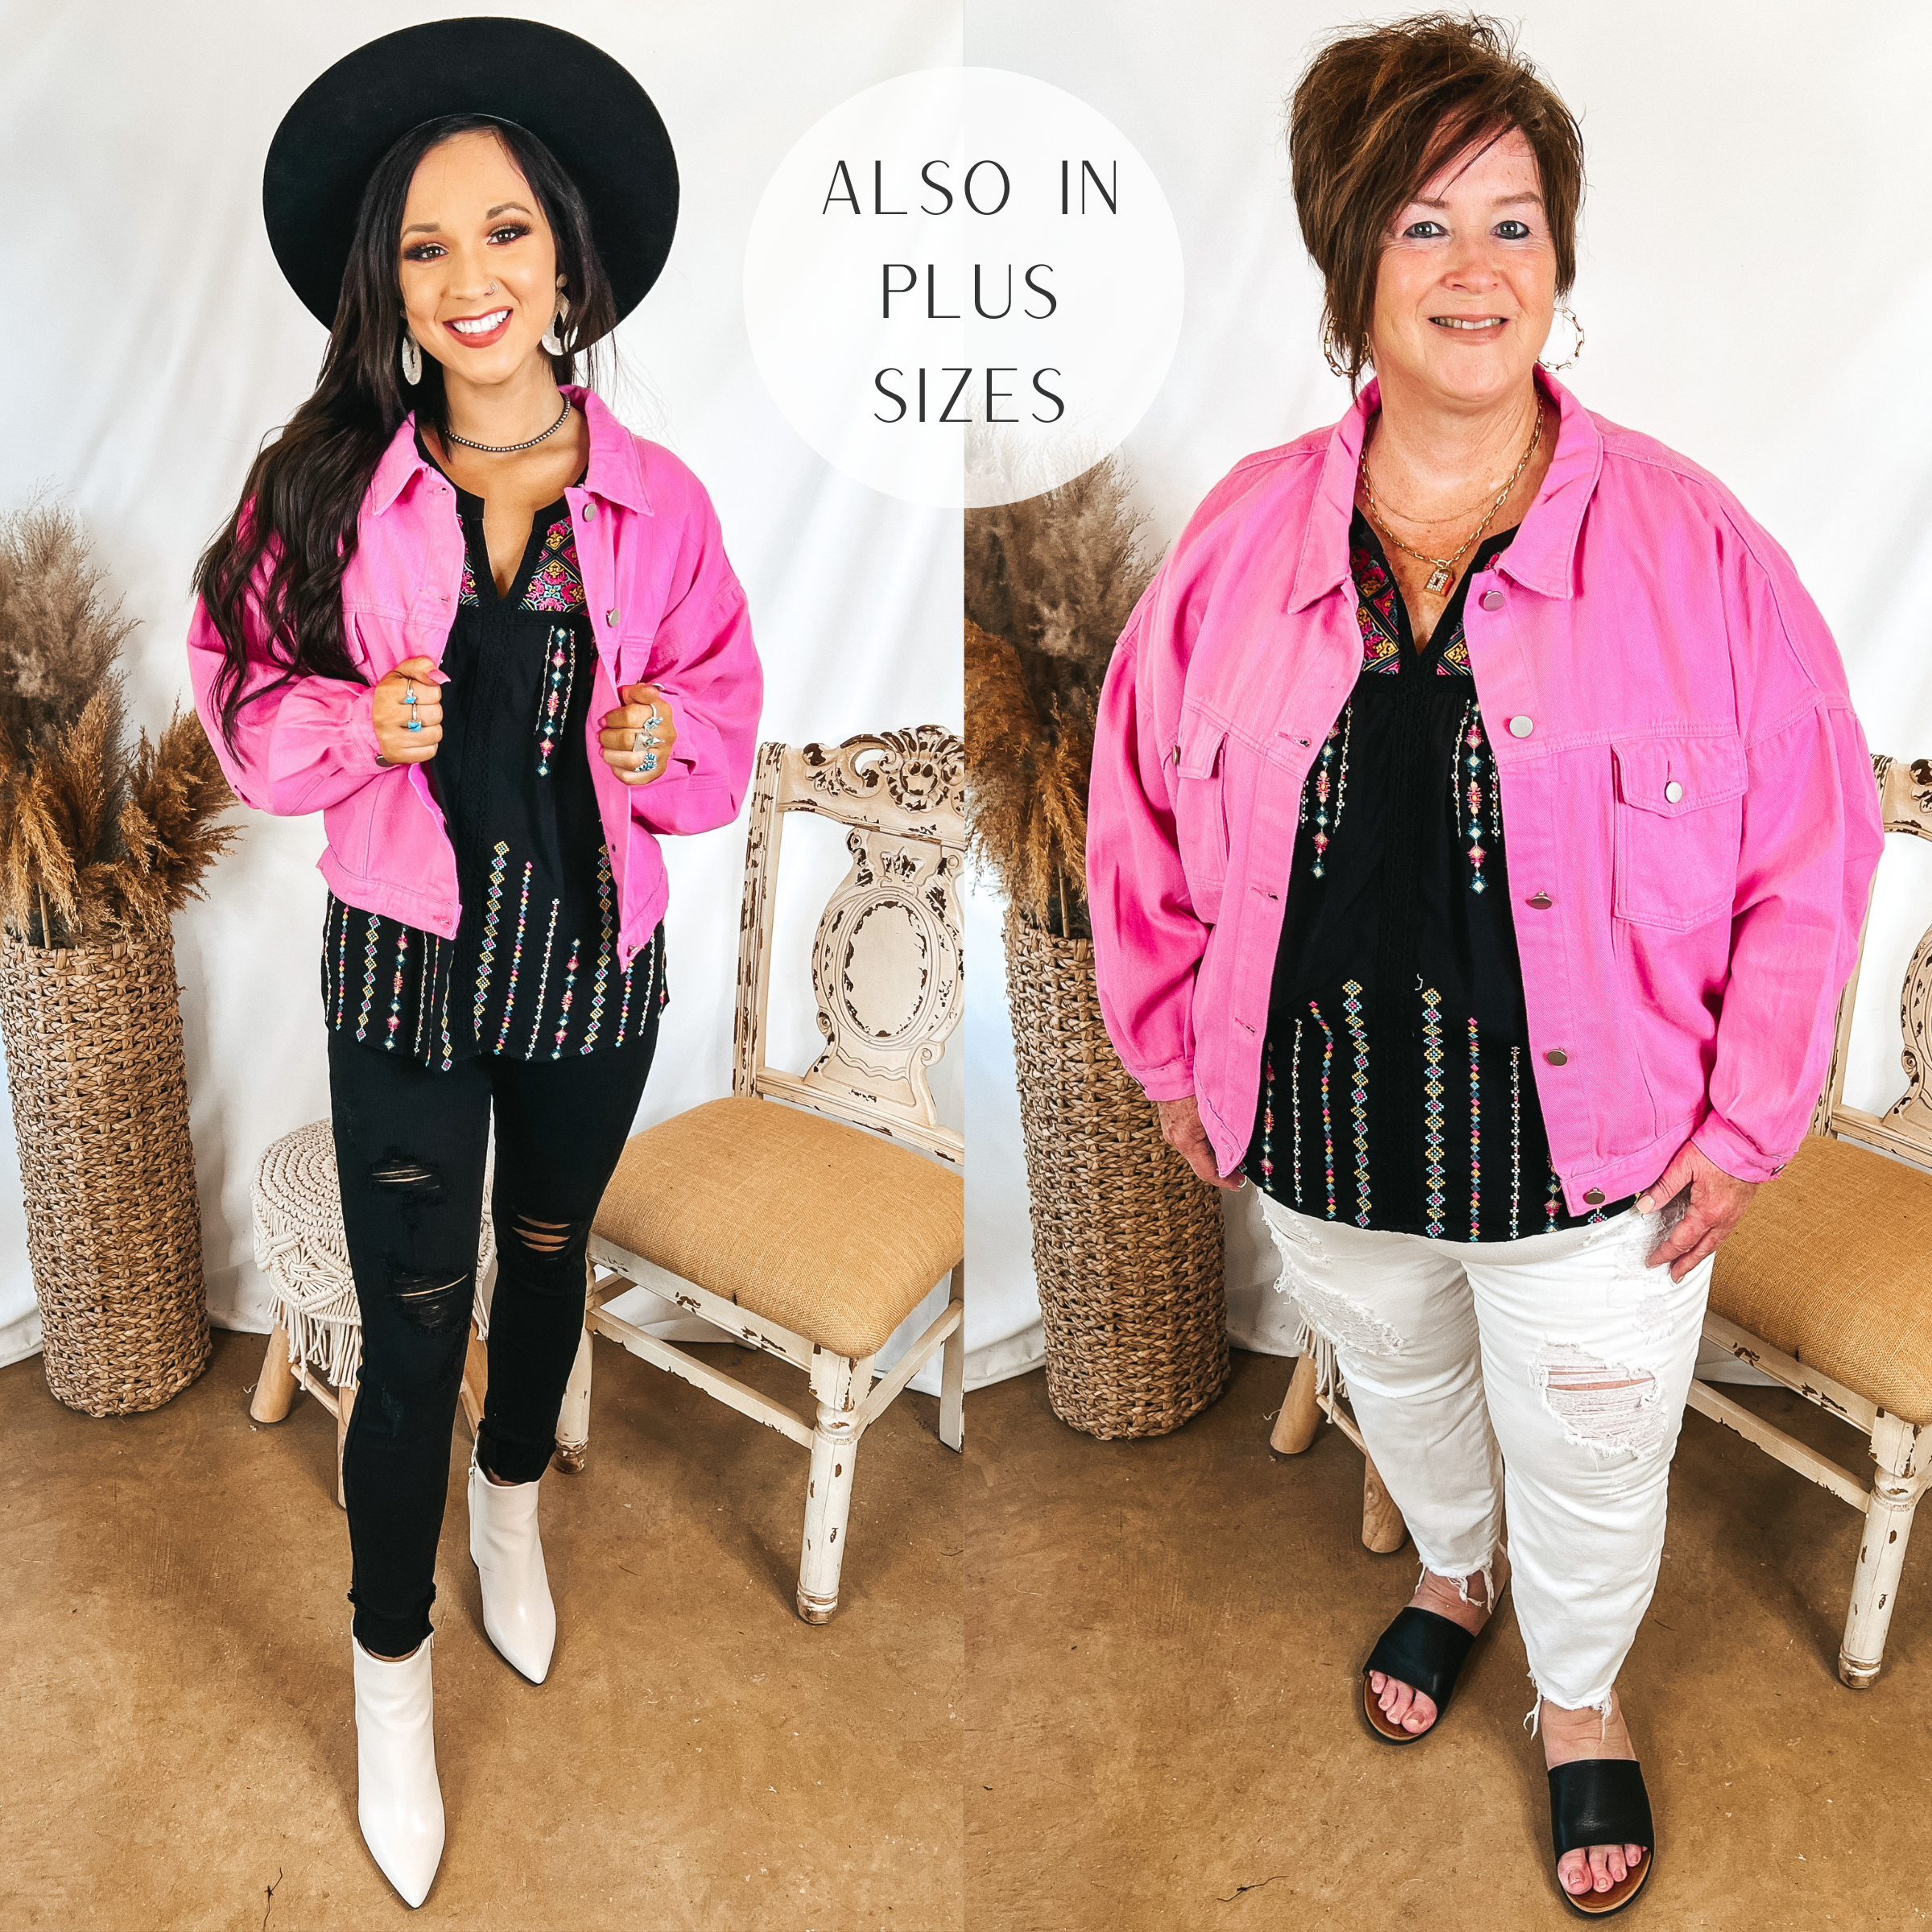 Models are wearing a bright pink denim jacket over a black embroidered top. Size small model has it paired with black jeans, a black hat, and white booties. Plus size model has it paired with white jeans, black sandals, and gold jewelry.